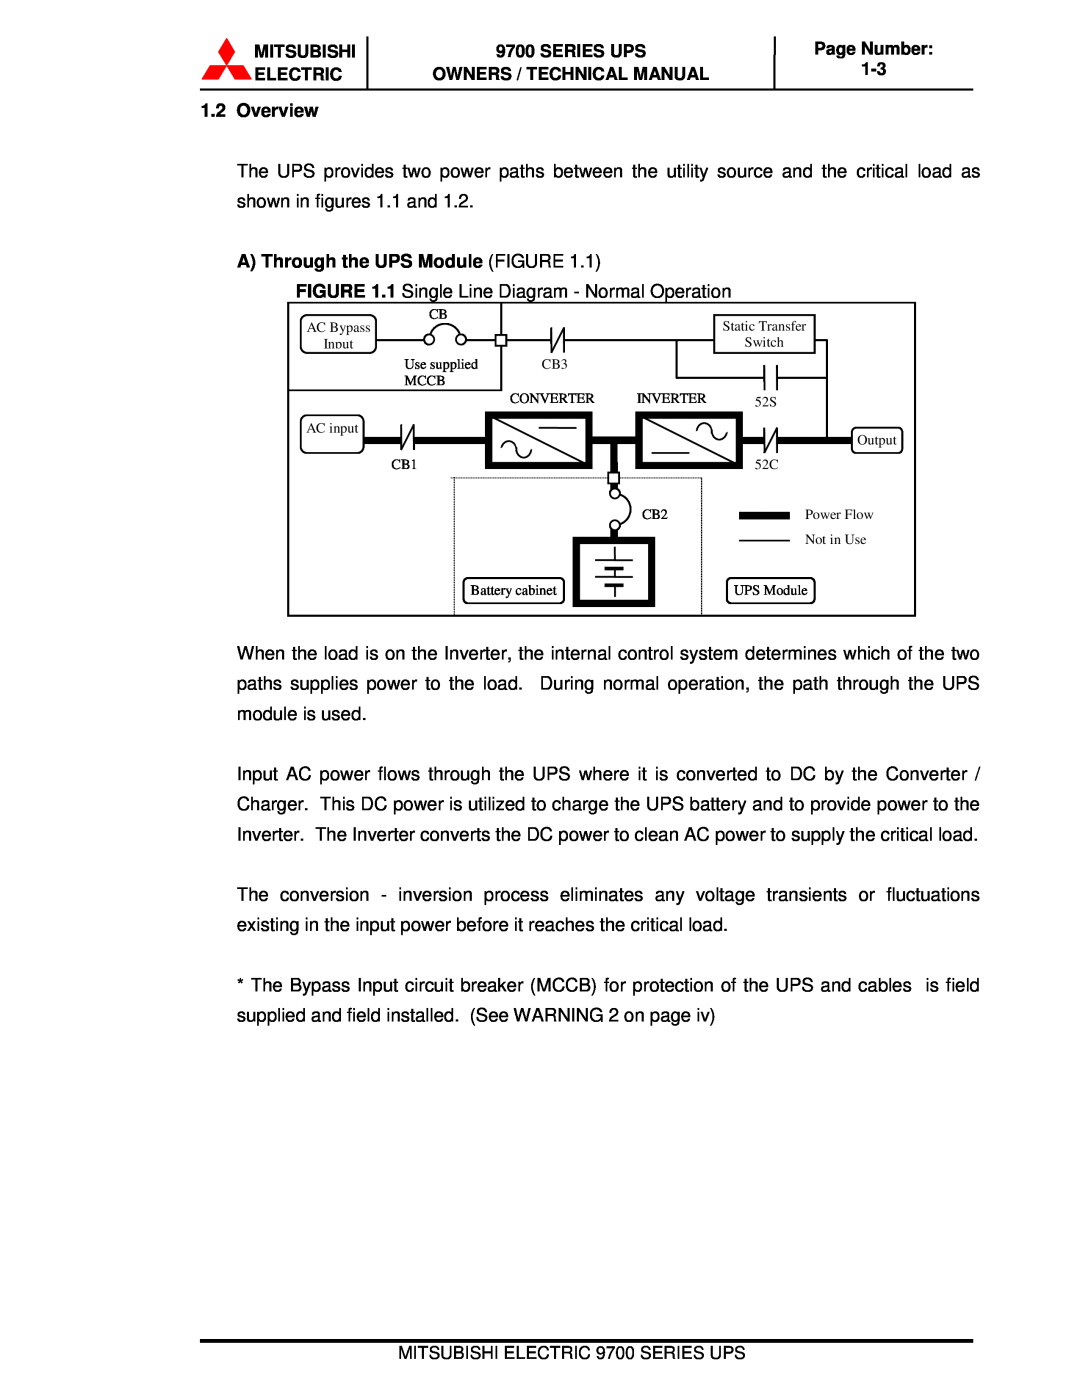 Mitsubishi Electronics 9700 Series technical manual Overview, A Through the UPS Module FIGURE 